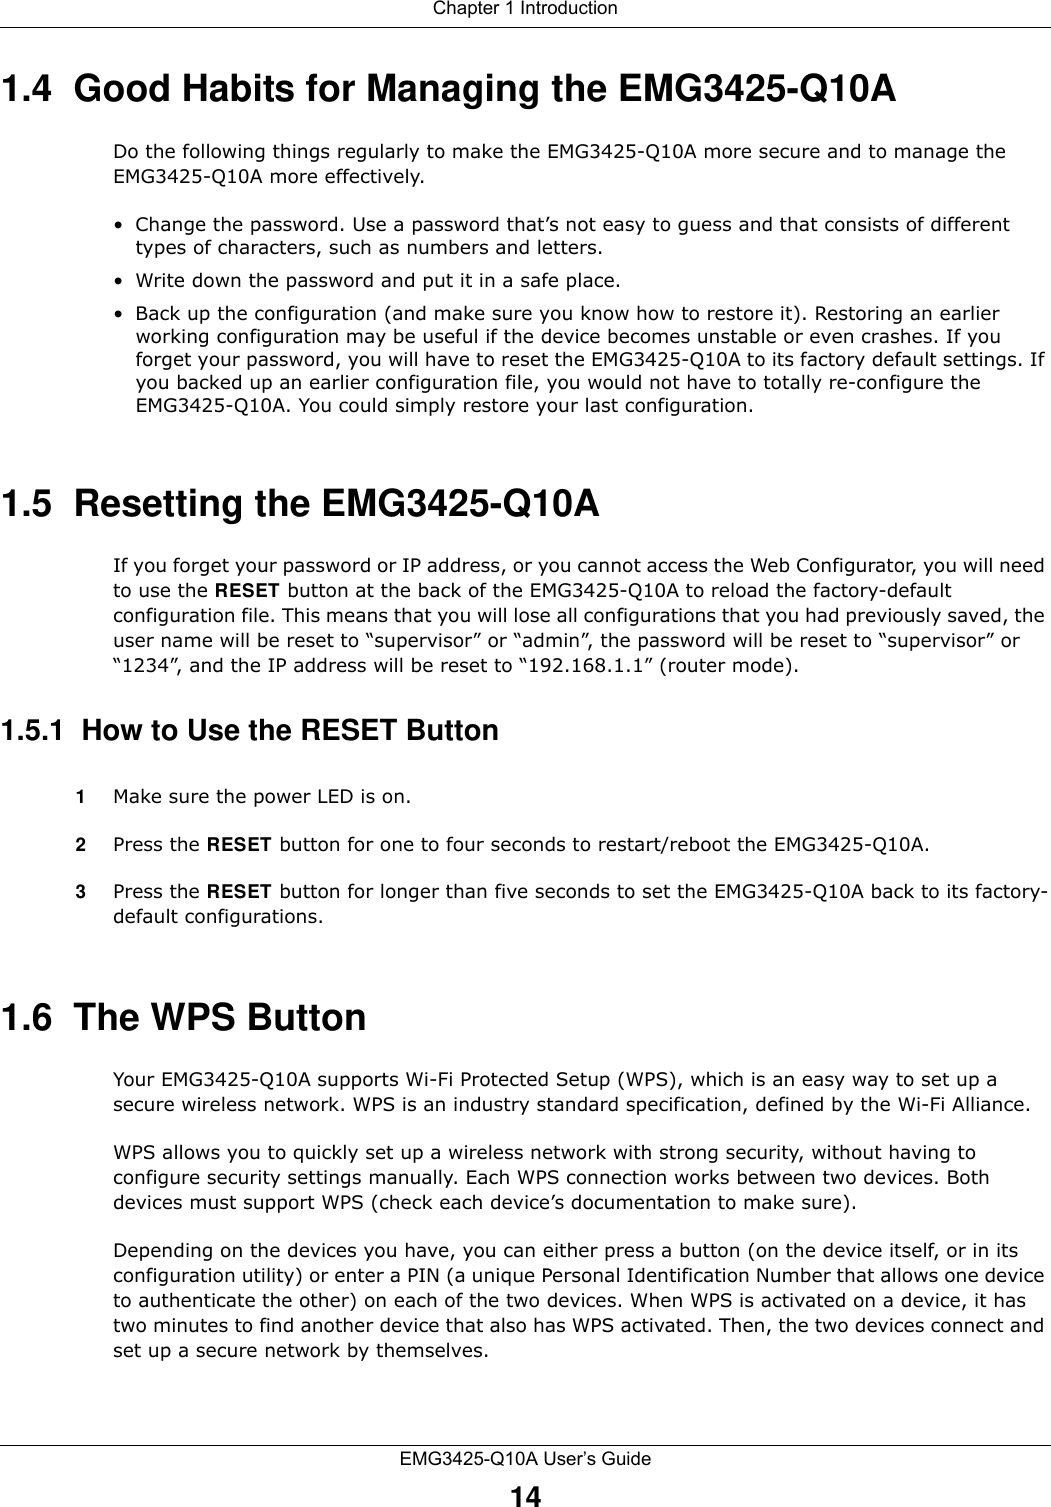 Chapter 1 IntroductionEMG3425-Q10A User’s Guide141.4  Good Habits for Managing the EMG3425-Q10ADo the following things regularly to make the EMG3425-Q10A more secure and to manage the EMG3425-Q10A more effectively.• Change the password. Use a password that’s not easy to guess and that consists of different types of characters, such as numbers and letters.• Write down the password and put it in a safe place.• Back up the configuration (and make sure you know how to restore it). Restoring an earlier working configuration may be useful if the device becomes unstable or even crashes. If you forget your password, you will have to reset the EMG3425-Q10A to its factory default settings. If you backed up an earlier configuration file, you would not have to totally re-configure the EMG3425-Q10A. You could simply restore your last configuration.1.5  Resetting the EMG3425-Q10AIf you forget your password or IP address, or you cannot access the Web Configurator, you will need to use the RESET button at the back of the EMG3425-Q10A to reload the factory-default configuration file. This means that you will lose all configurations that you had previously saved, the user name will be reset to “supervisor” or “admin”, the password will be reset to “supervisor” or “1234”, and the IP address will be reset to “192.168.1.1” (router mode).1.5.1  How to Use the RESET Button1Make sure the power LED is on.2Press the RESET button for one to four seconds to restart/reboot the EMG3425-Q10A.3Press the RESET button for longer than five seconds to set the EMG3425-Q10A back to its factory-default configurations.1.6  The WPS ButtonYour EMG3425-Q10A supports Wi-Fi Protected Setup (WPS), which is an easy way to set up a secure wireless network. WPS is an industry standard specification, defined by the Wi-Fi Alliance.WPS allows you to quickly set up a wireless network with strong security, without having to configure security settings manually. Each WPS connection works between two devices. Both devices must support WPS (check each device’s documentation to make sure). Depending on the devices you have, you can either press a button (on the device itself, or in its configuration utility) or enter a PIN (a unique Personal Identification Number that allows one device to authenticate the other) on each of the two devices. When WPS is activated on a device, it has two minutes to find another device that also has WPS activated. Then, the two devices connect and set up a secure network by themselves.